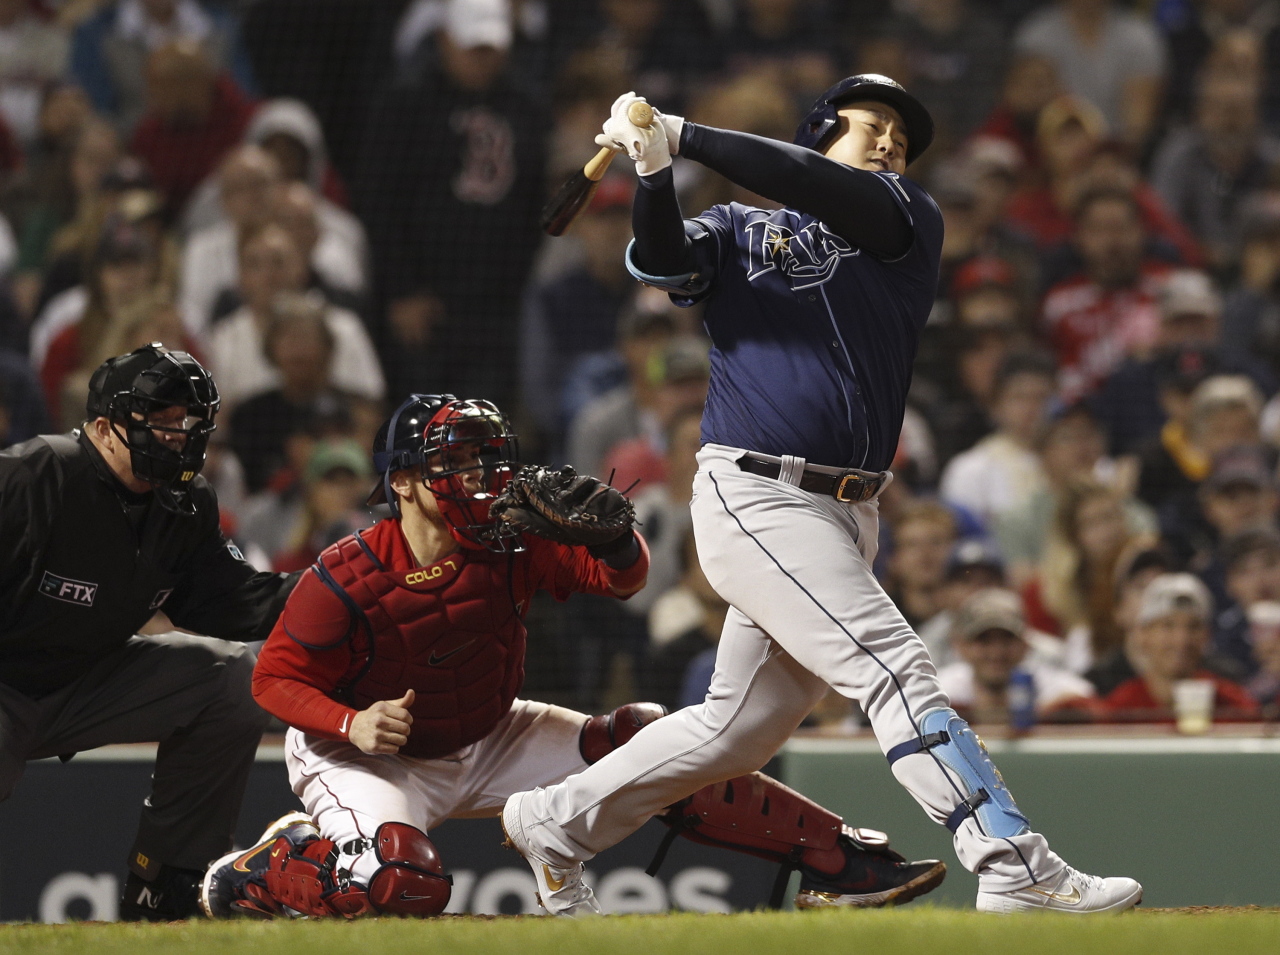 In this file photo from Oct. 11, 2021, Choi Ji-man of the Tampa Bay Rays strikes out against Josh Taylor of the Boston Red Sox during the top of the seventh inning of Game 4 of the American League Division Series at Fenway Park in Boston. (EPA-Yonhap)